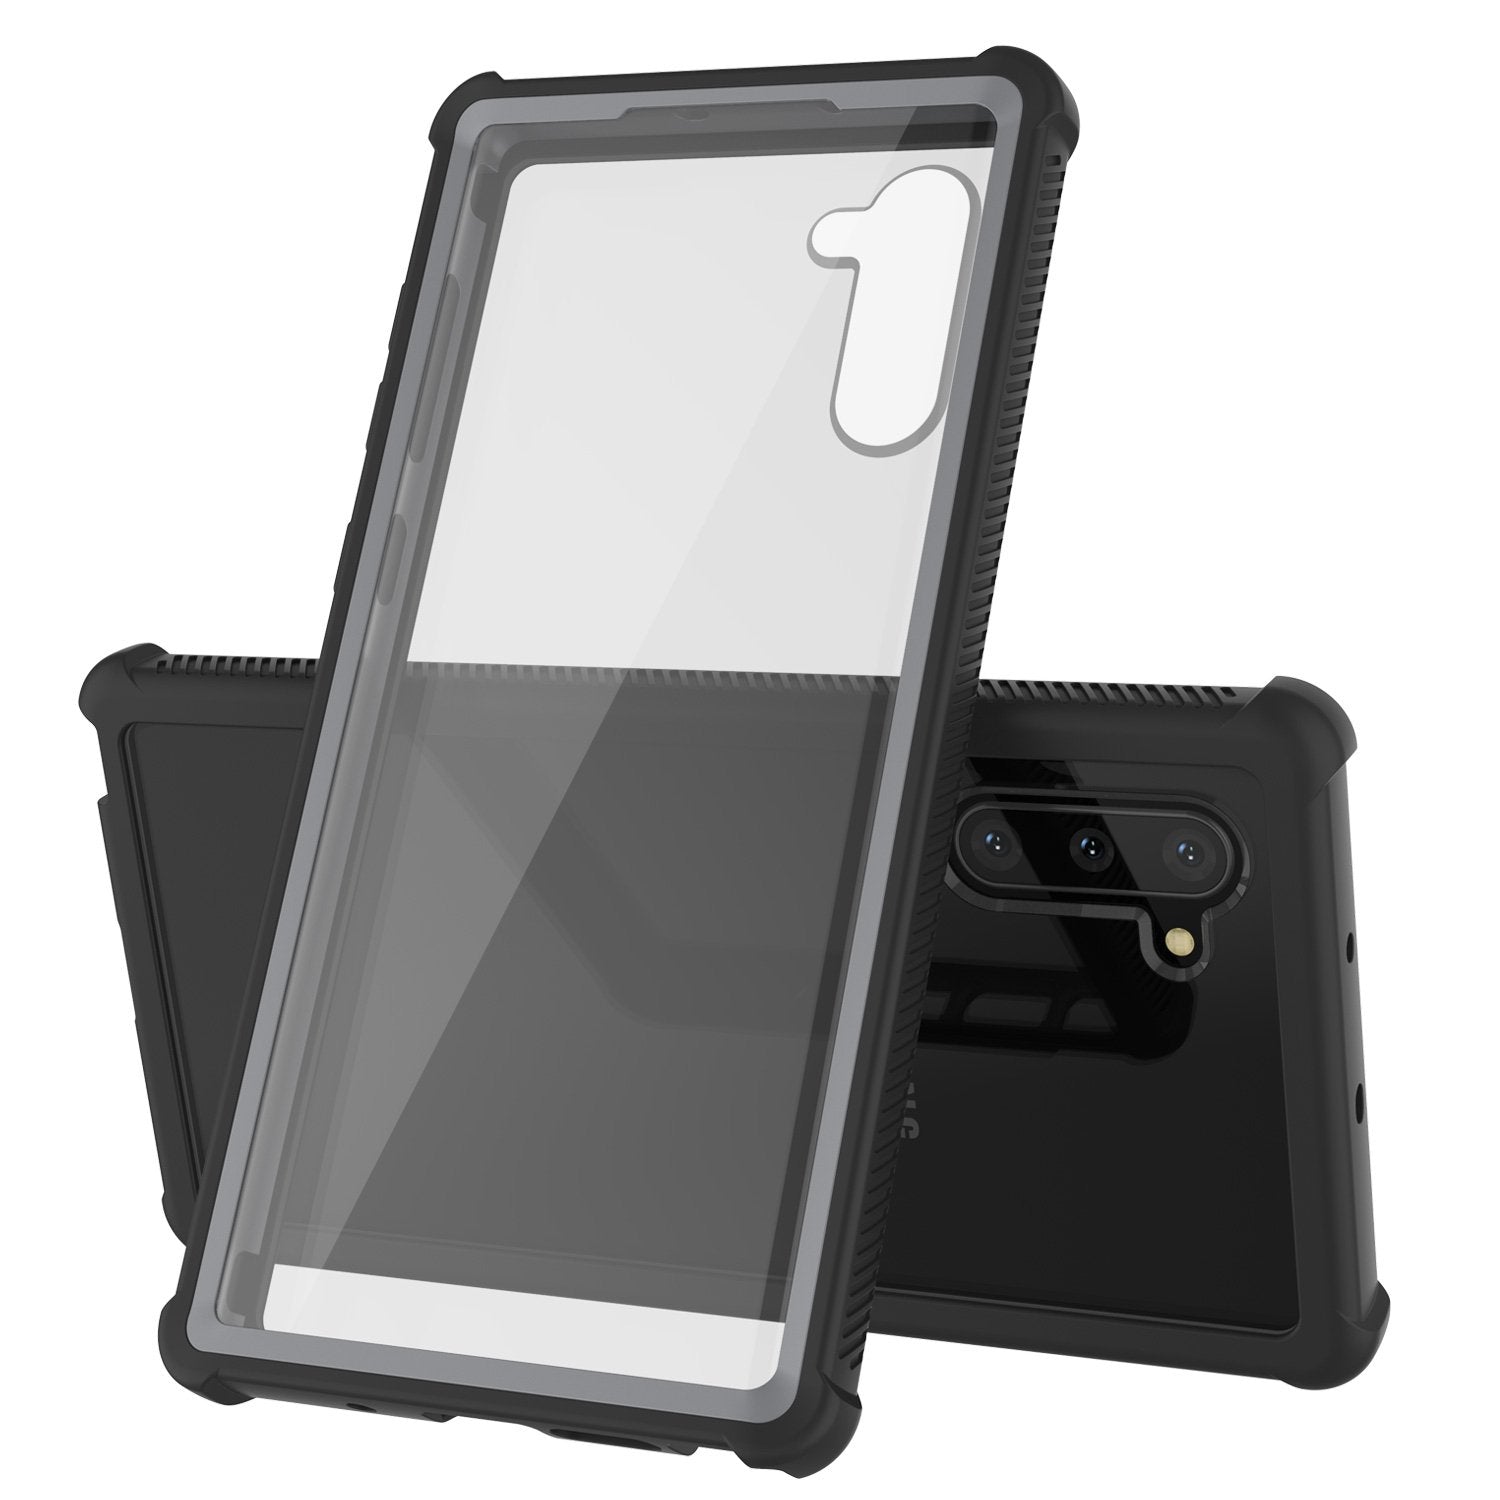 Punkcase Galaxy Note 10 Case, [Spartan Series] Black Rugged Heavy Duty Cover W/Built in Screen Protector